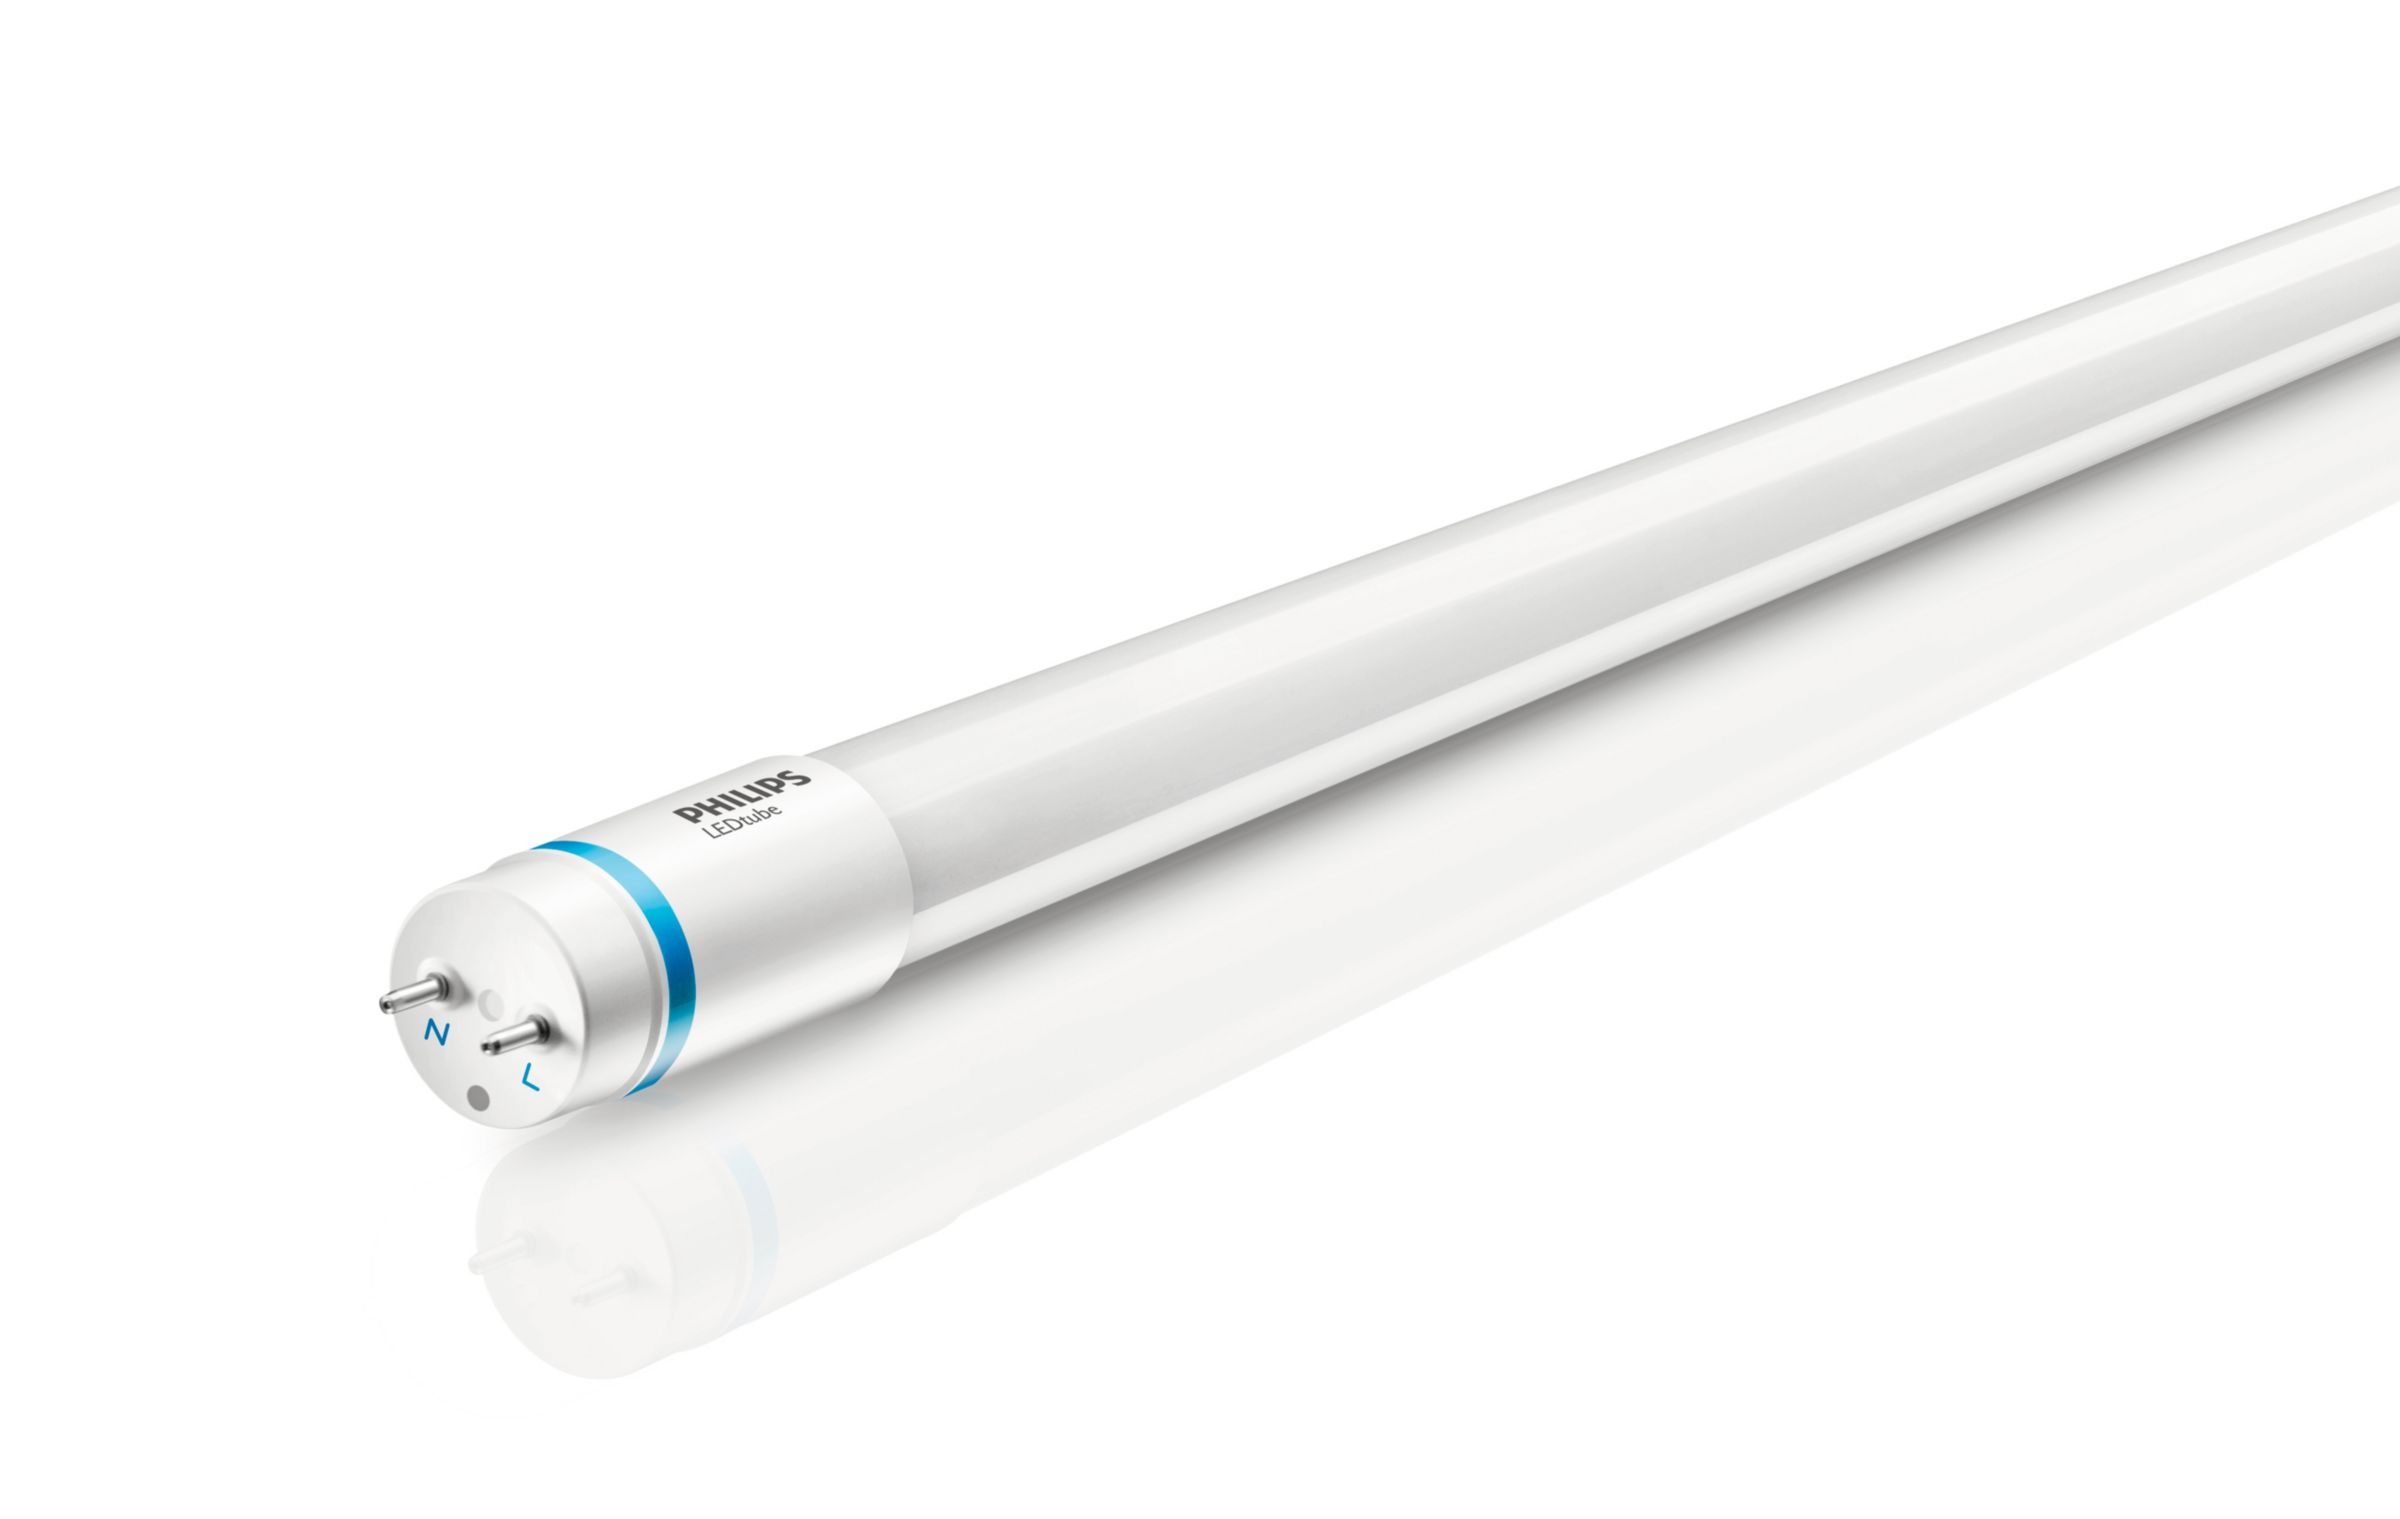 Philips DEL T8 Tube-Fluorescent Remplacement 2 FT 11 W COOL DAYLIGHT 6500K 865 environ 0.61 m